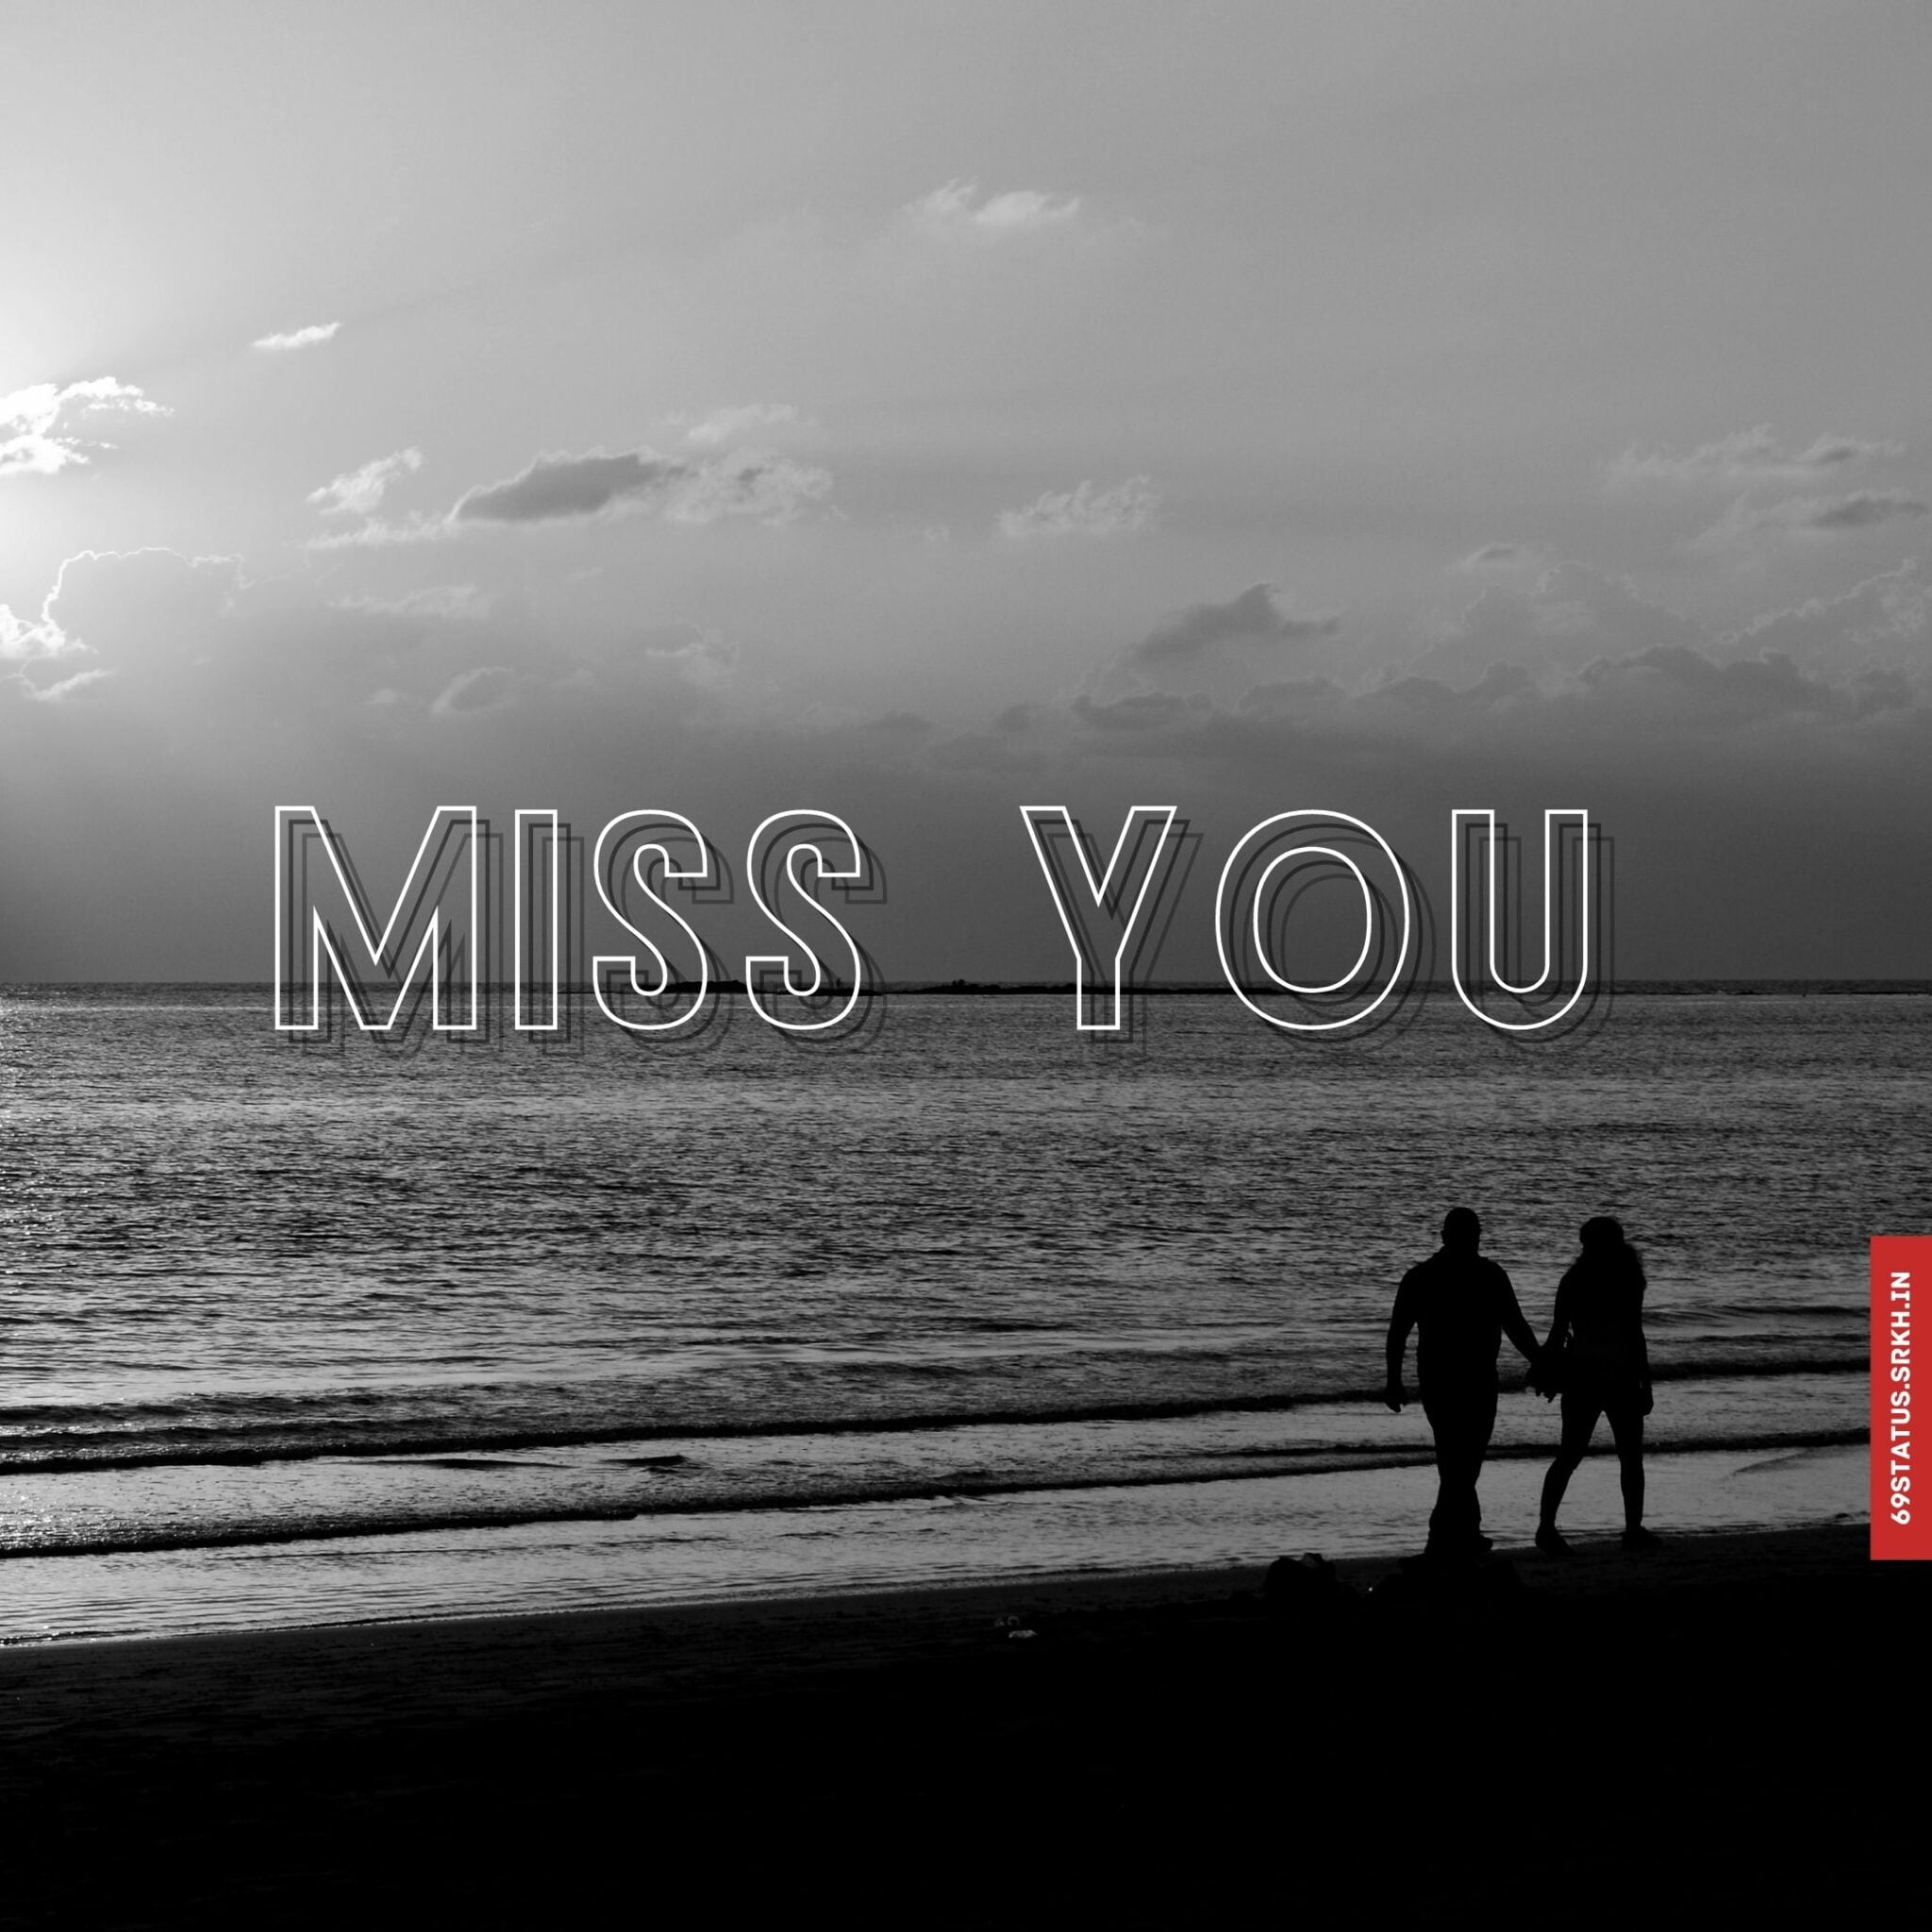 Miss you images love